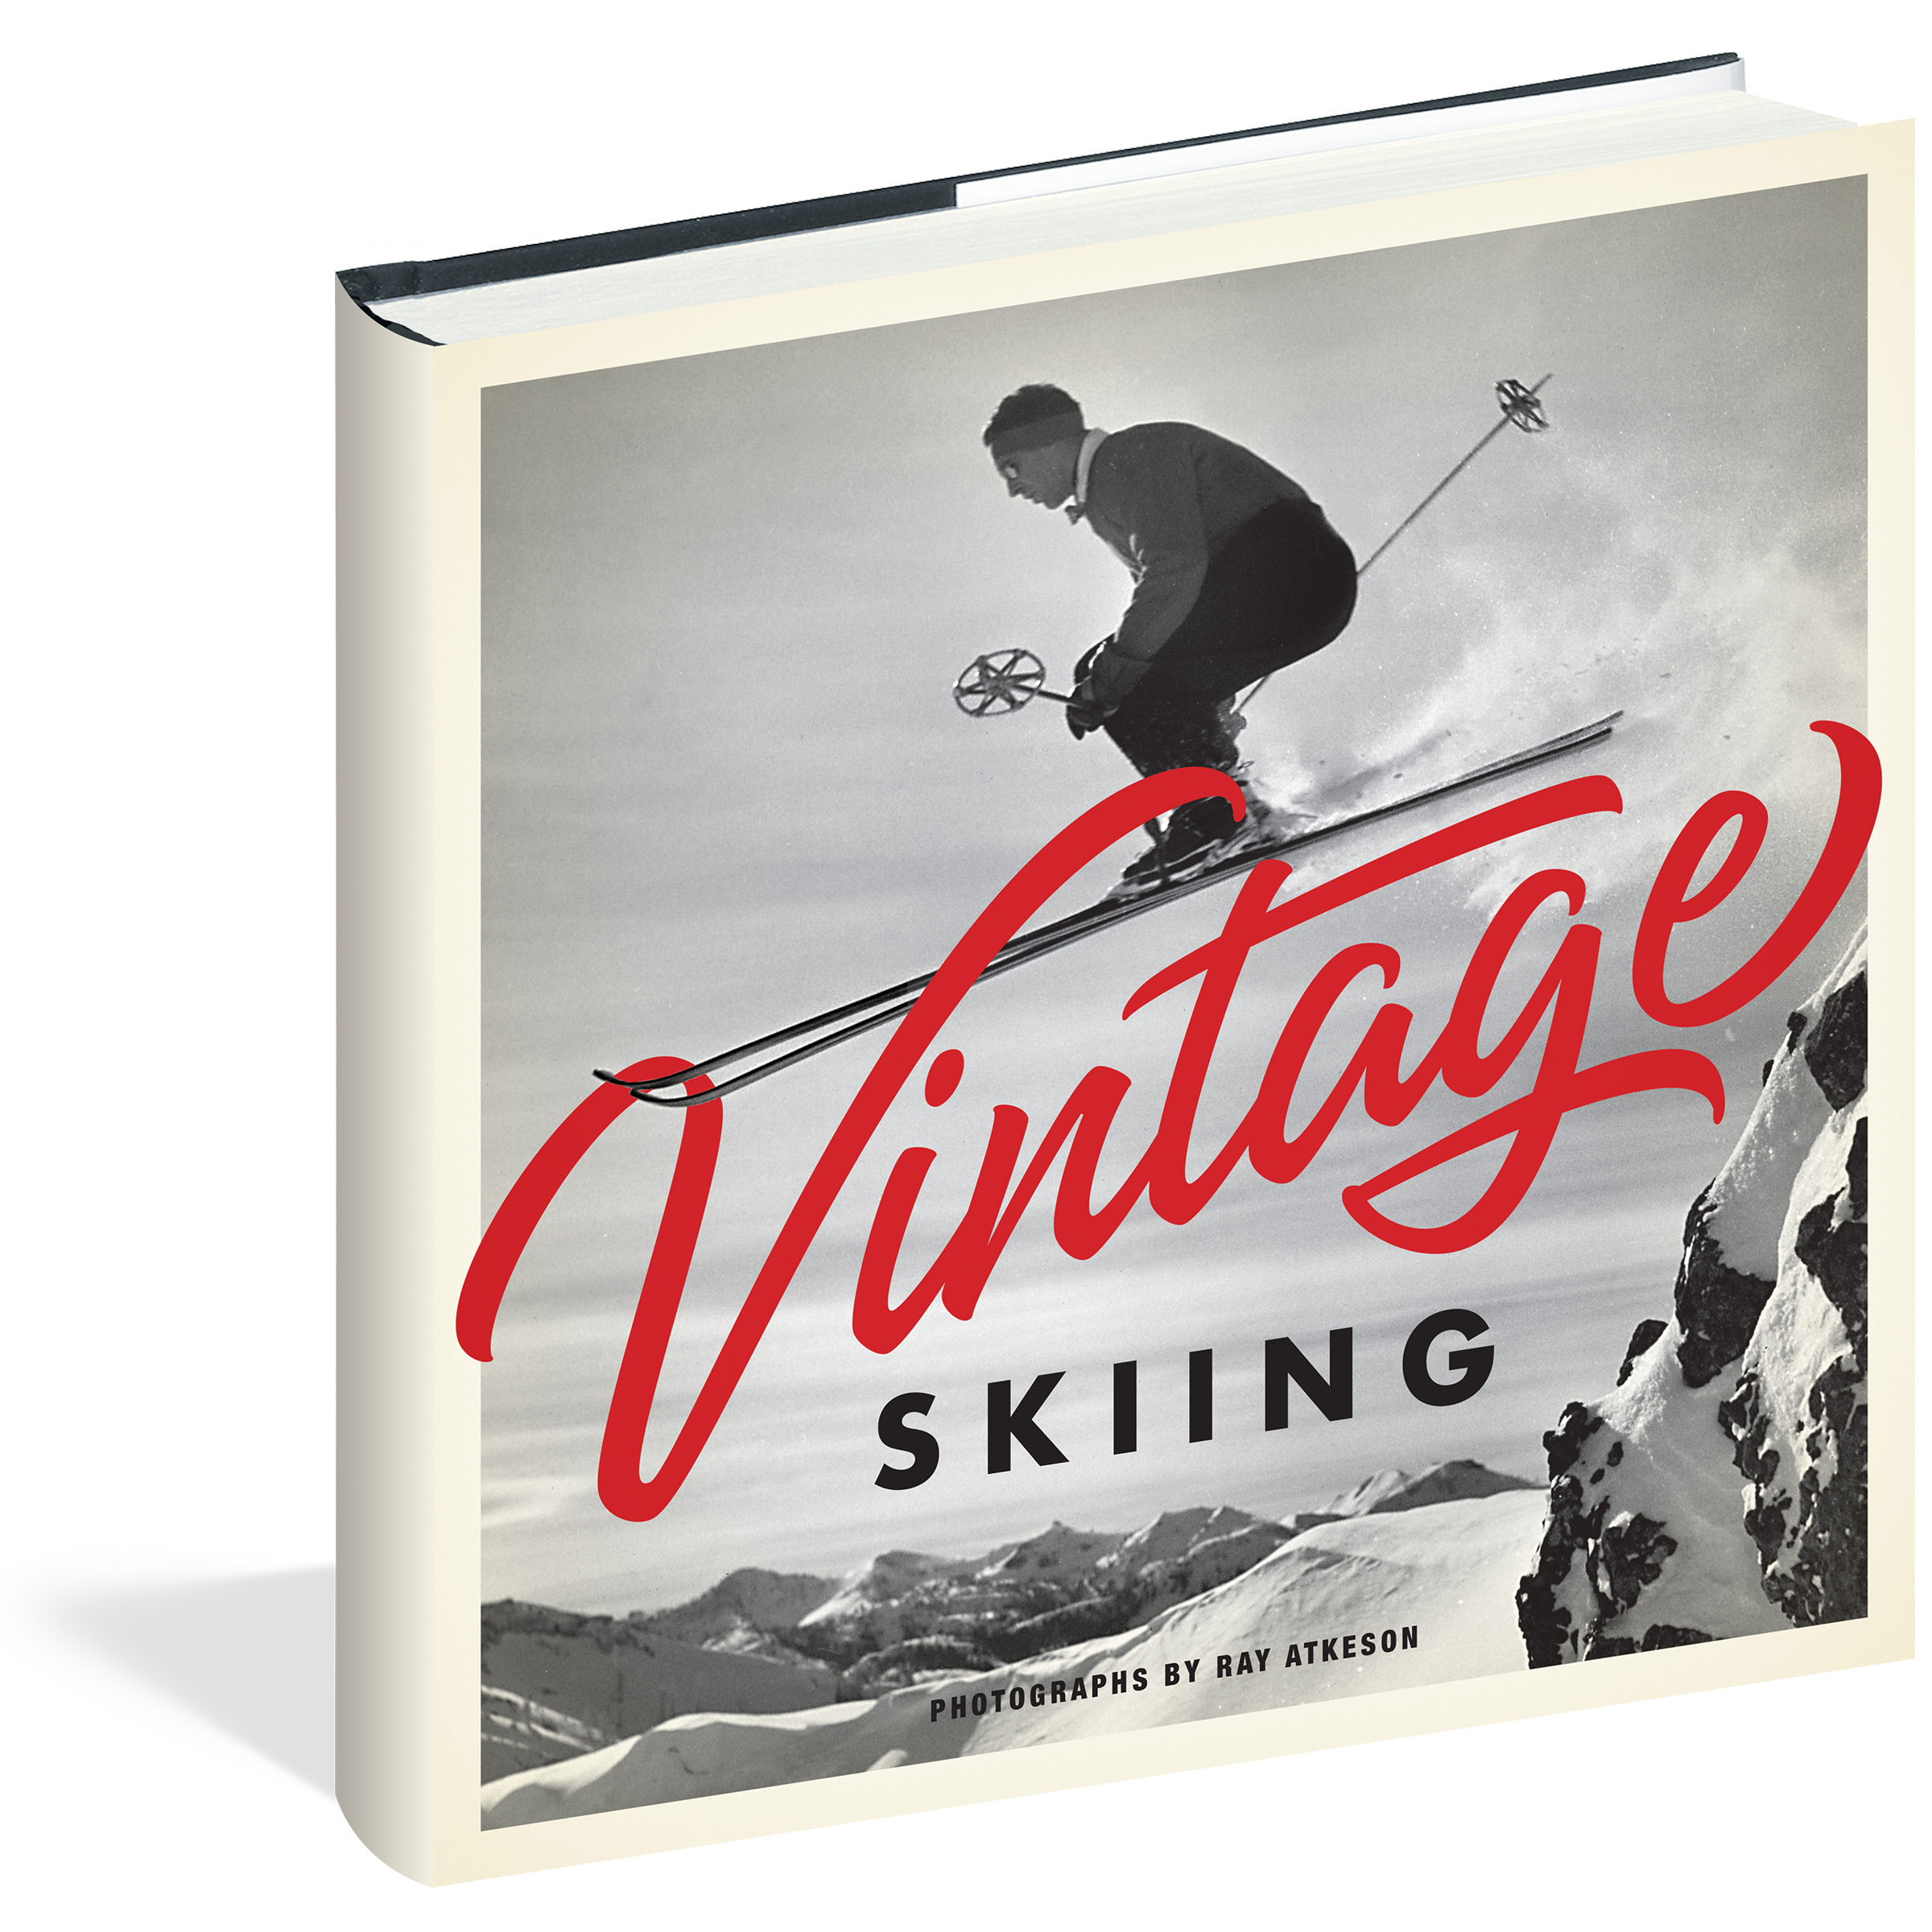 The cover of the book Vintage Skiing.